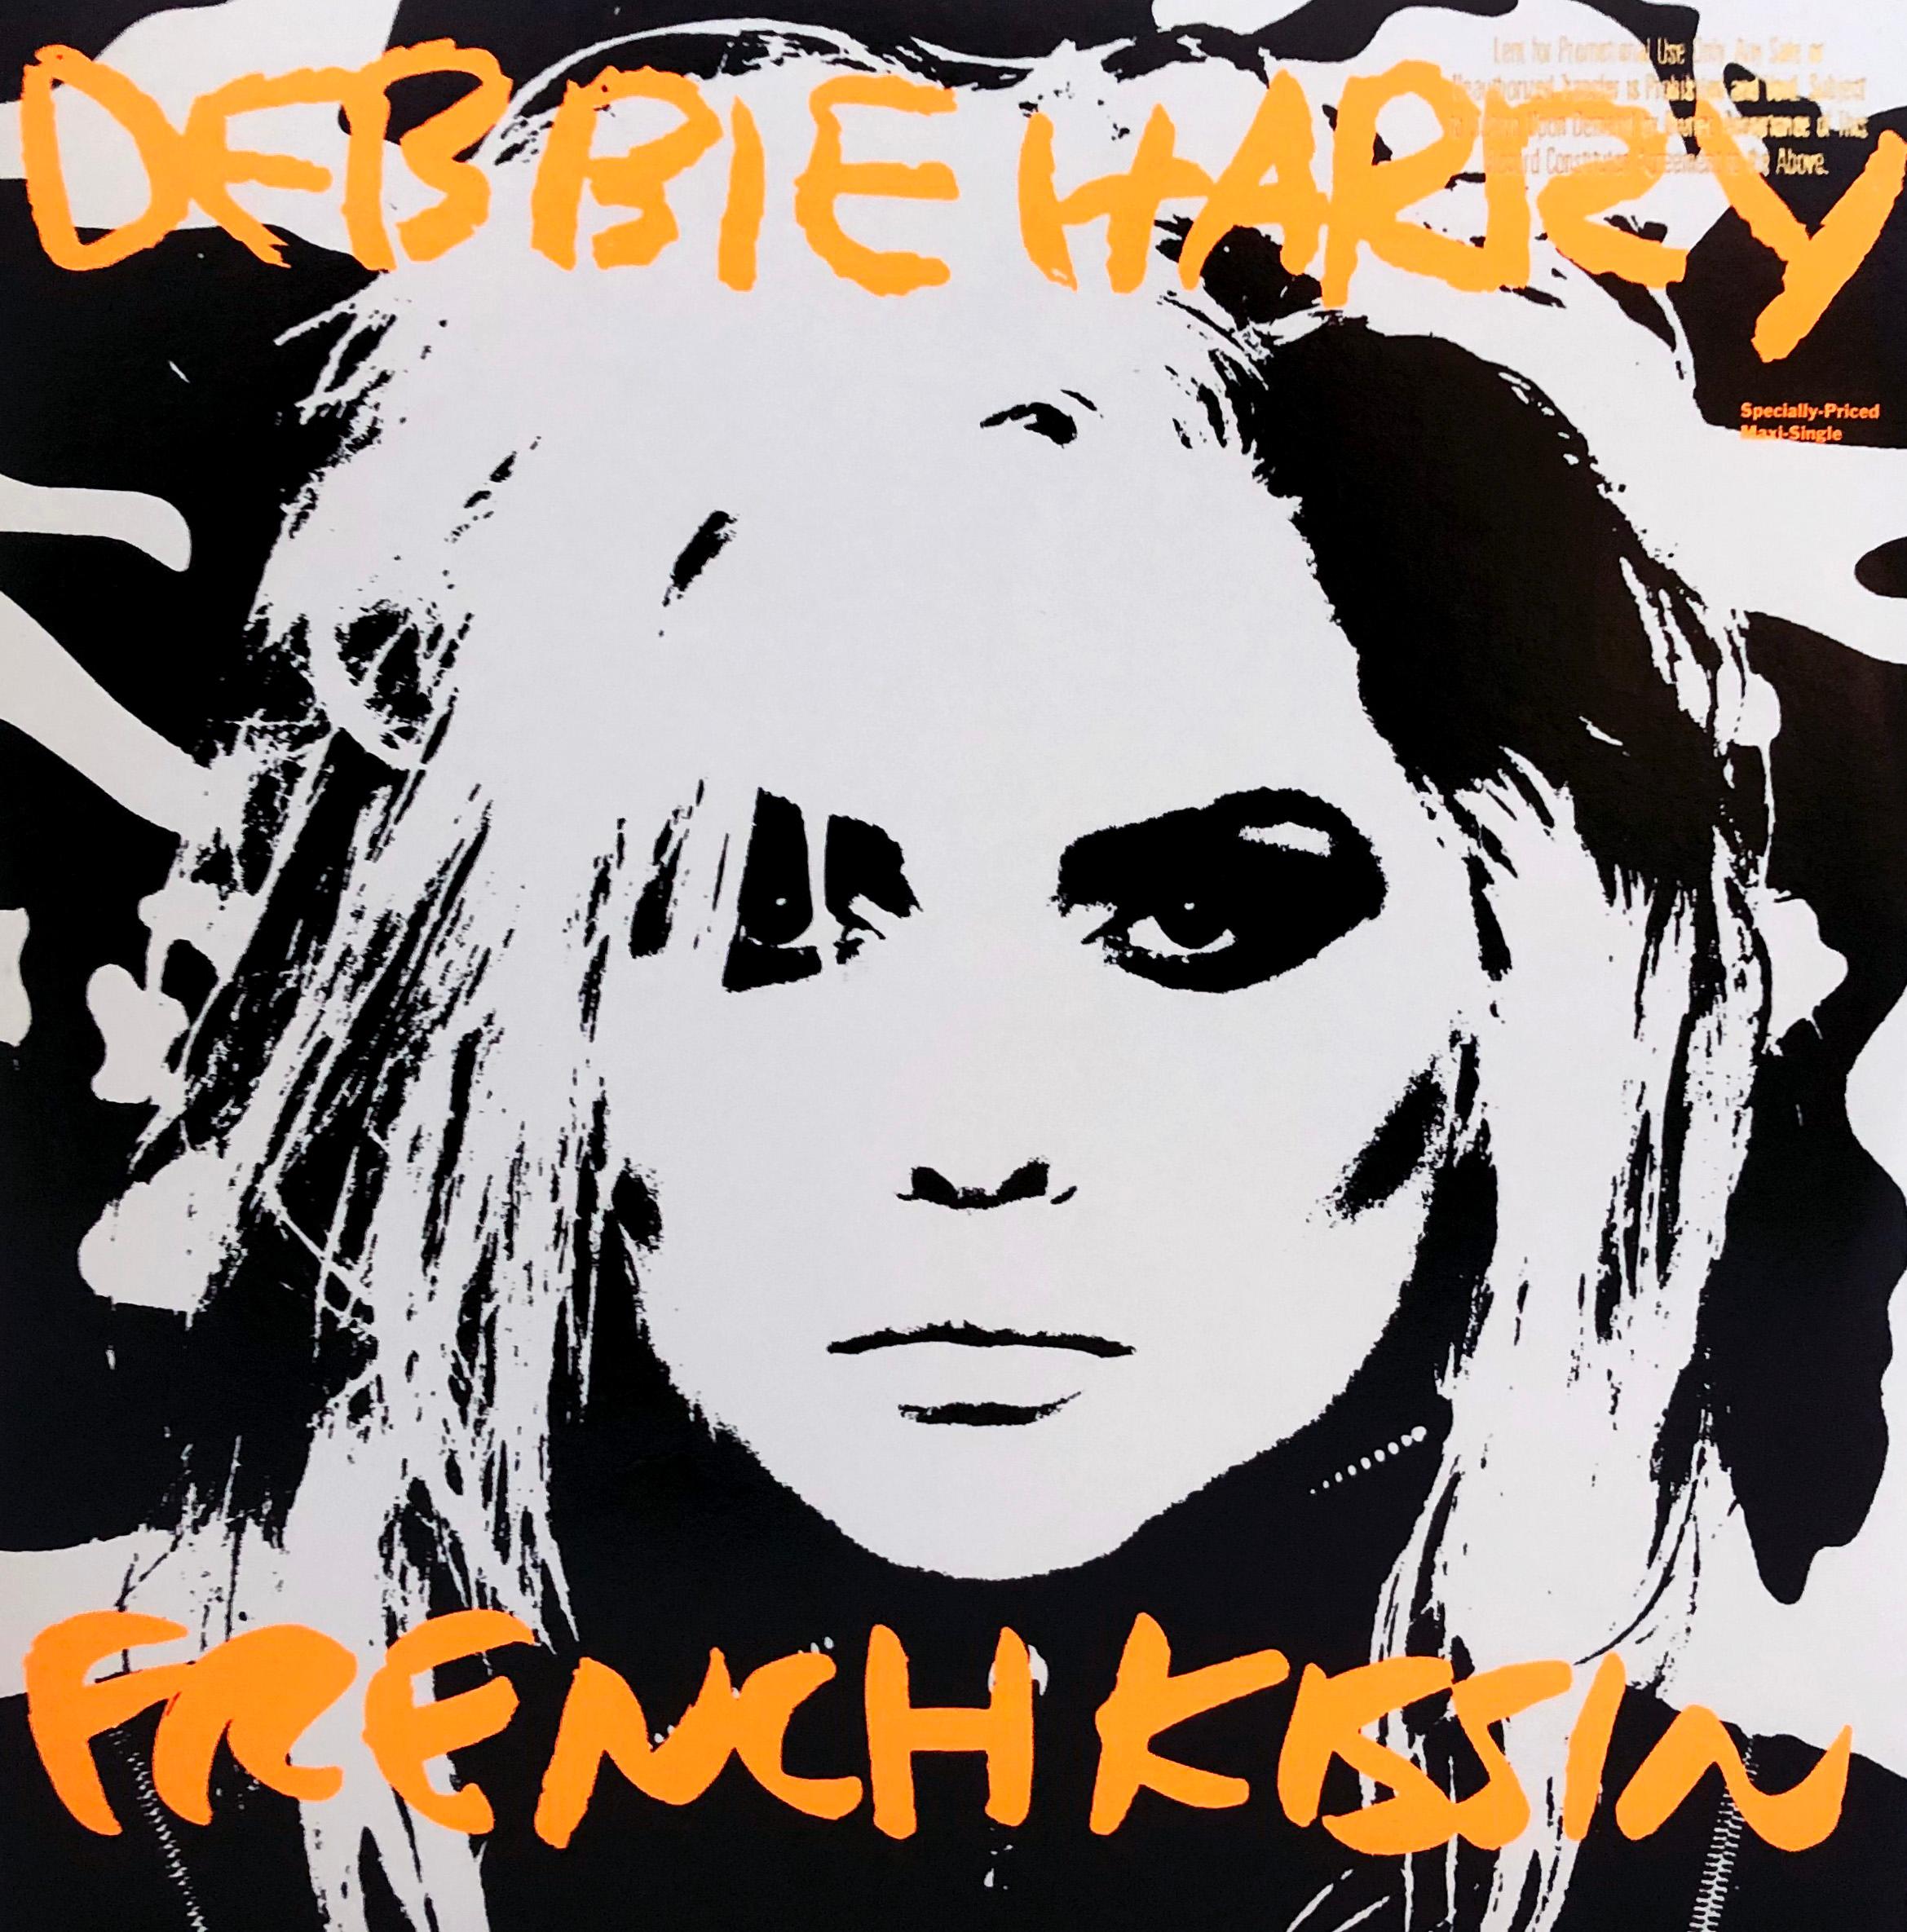 Debbie Harry, French Kissin, LP, 1986 - Art by Andy Warhol